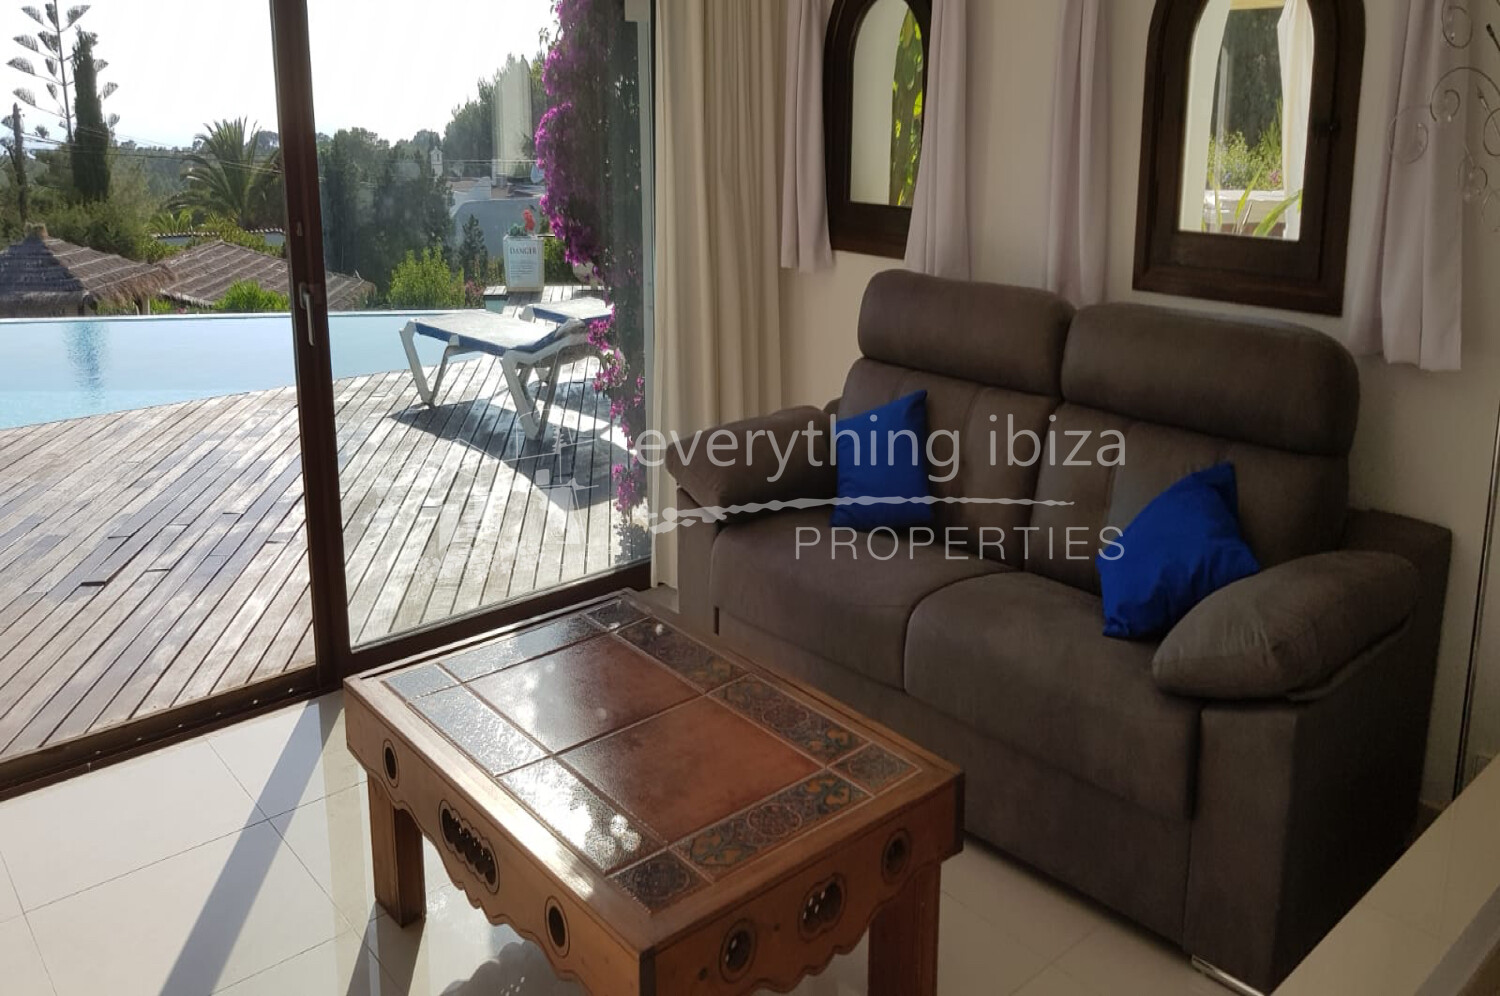 Magnificent Villa with Sea Views Close to Cala Salada, ref. 1439, for sale in Ibiza by everything ibiza Properties